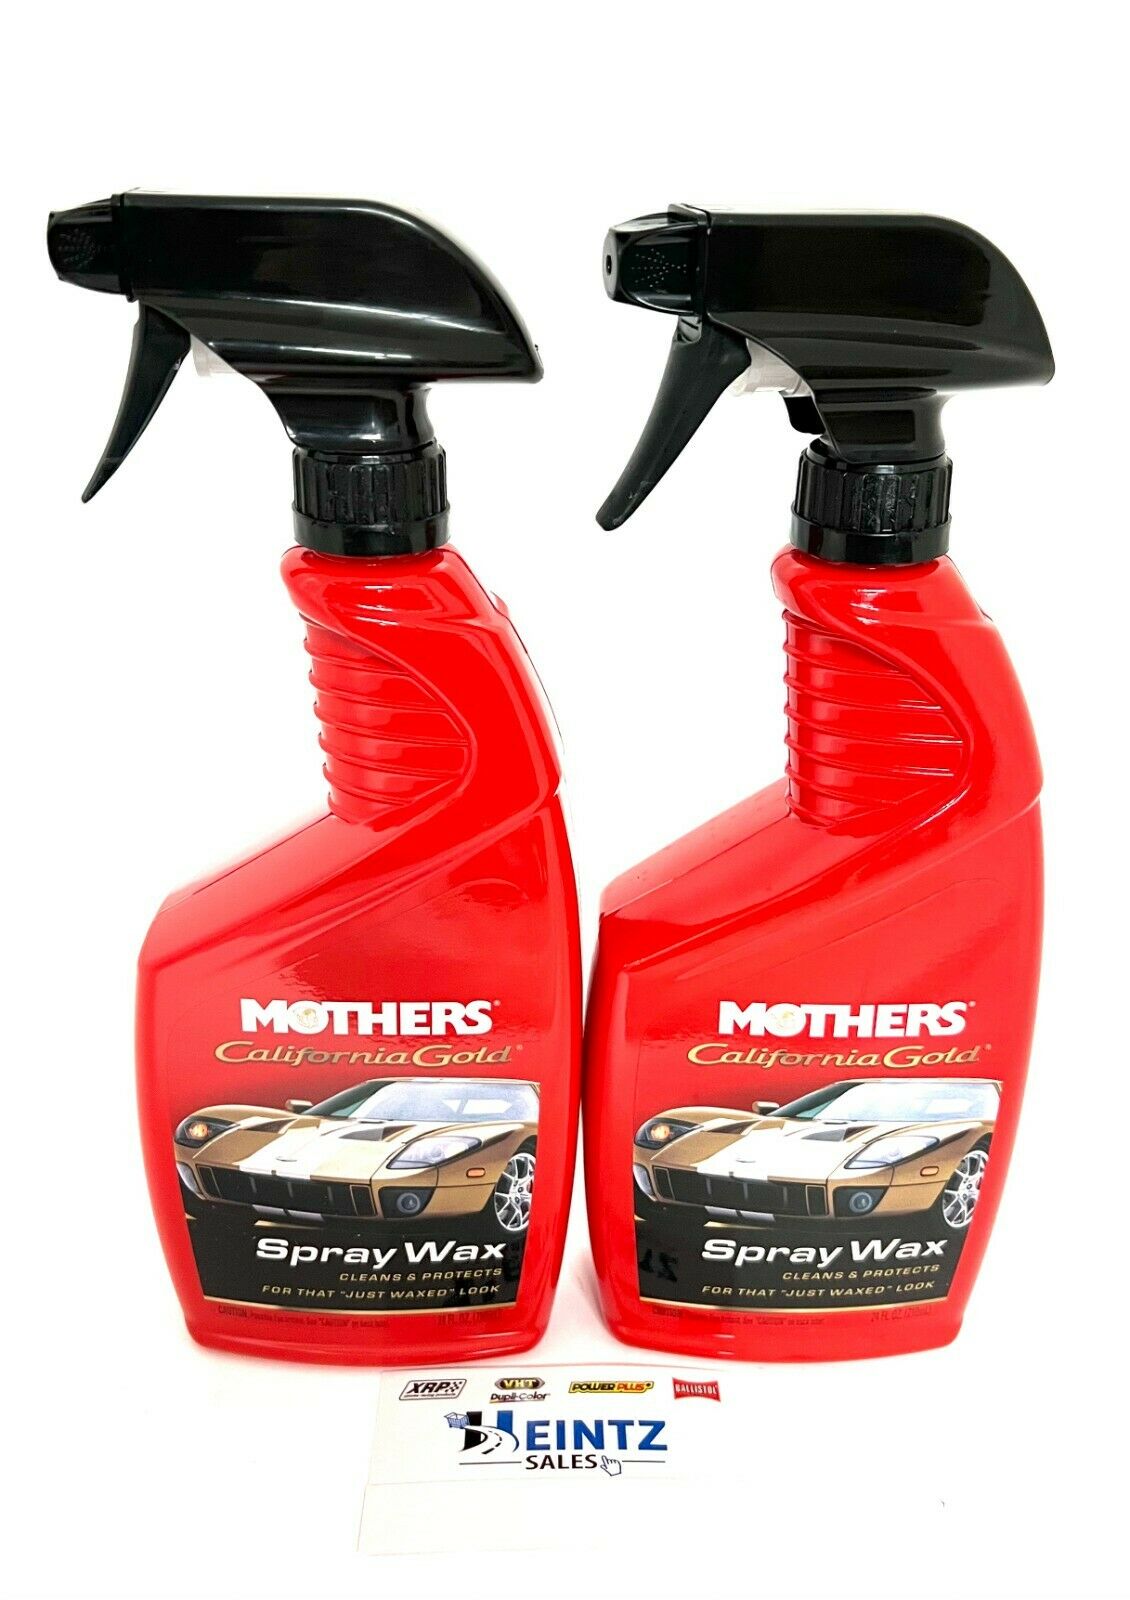 MOTHERS 05724 California Gold Spray Wax 2 PACK- Protect - Long Lasting Shine - 24 oz.